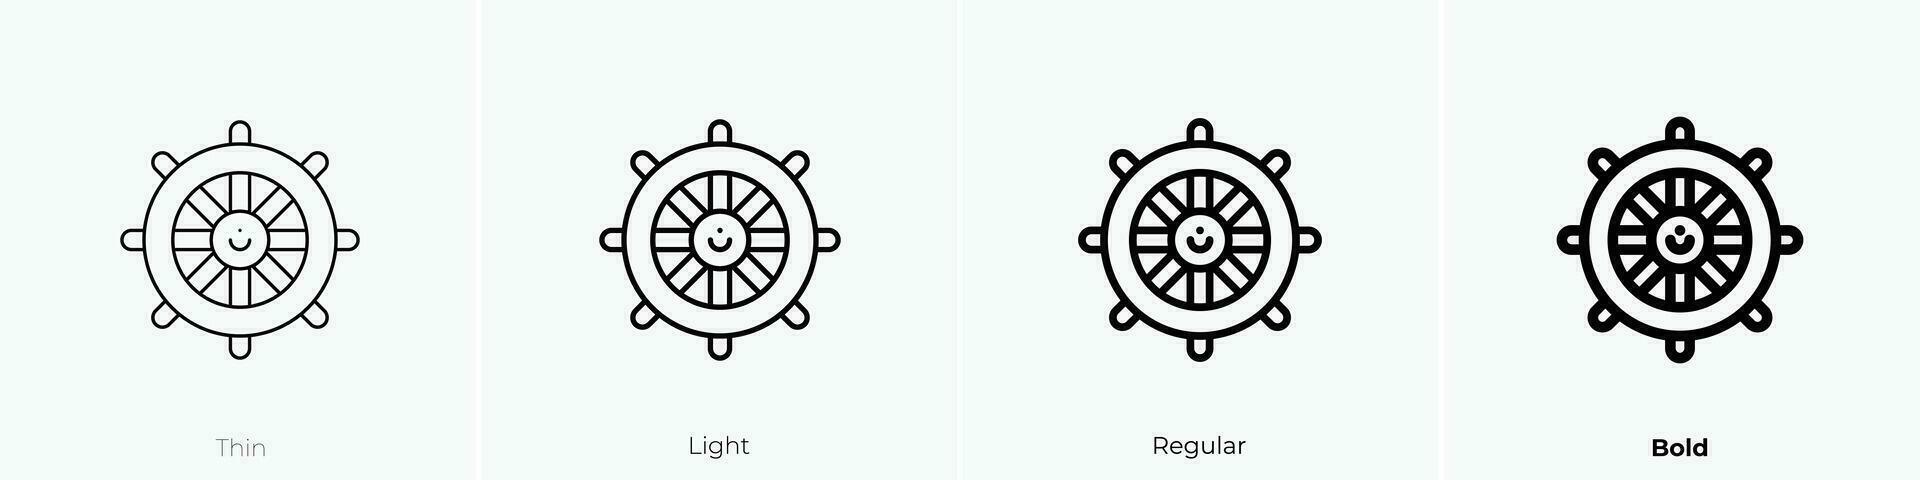 rudder icon. Thin, Light, Regular And Bold style design isolated on white background vector